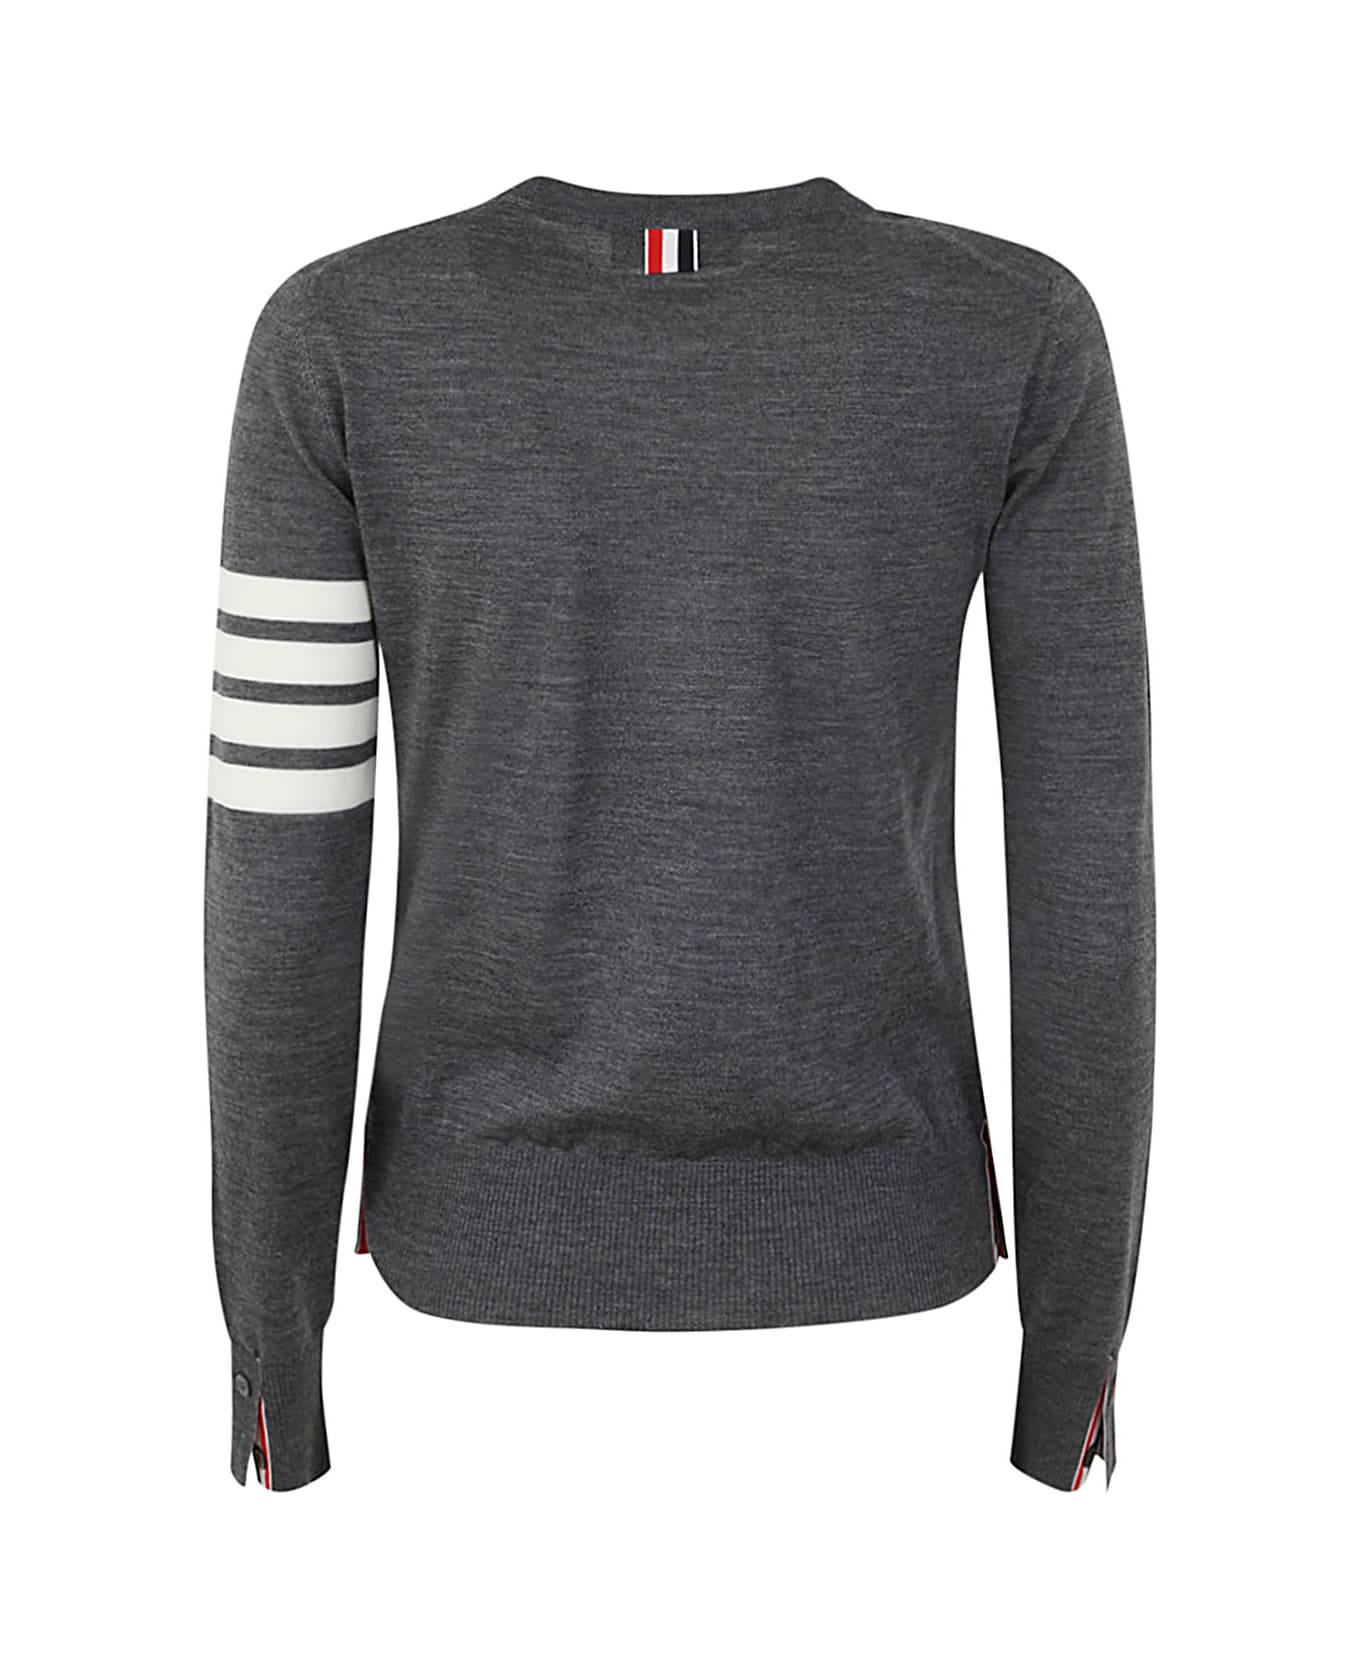 Thom Browne Relaxed Fit Pullover With 4 Bar In Fine Merino Wool - Med Grey ニットウェア